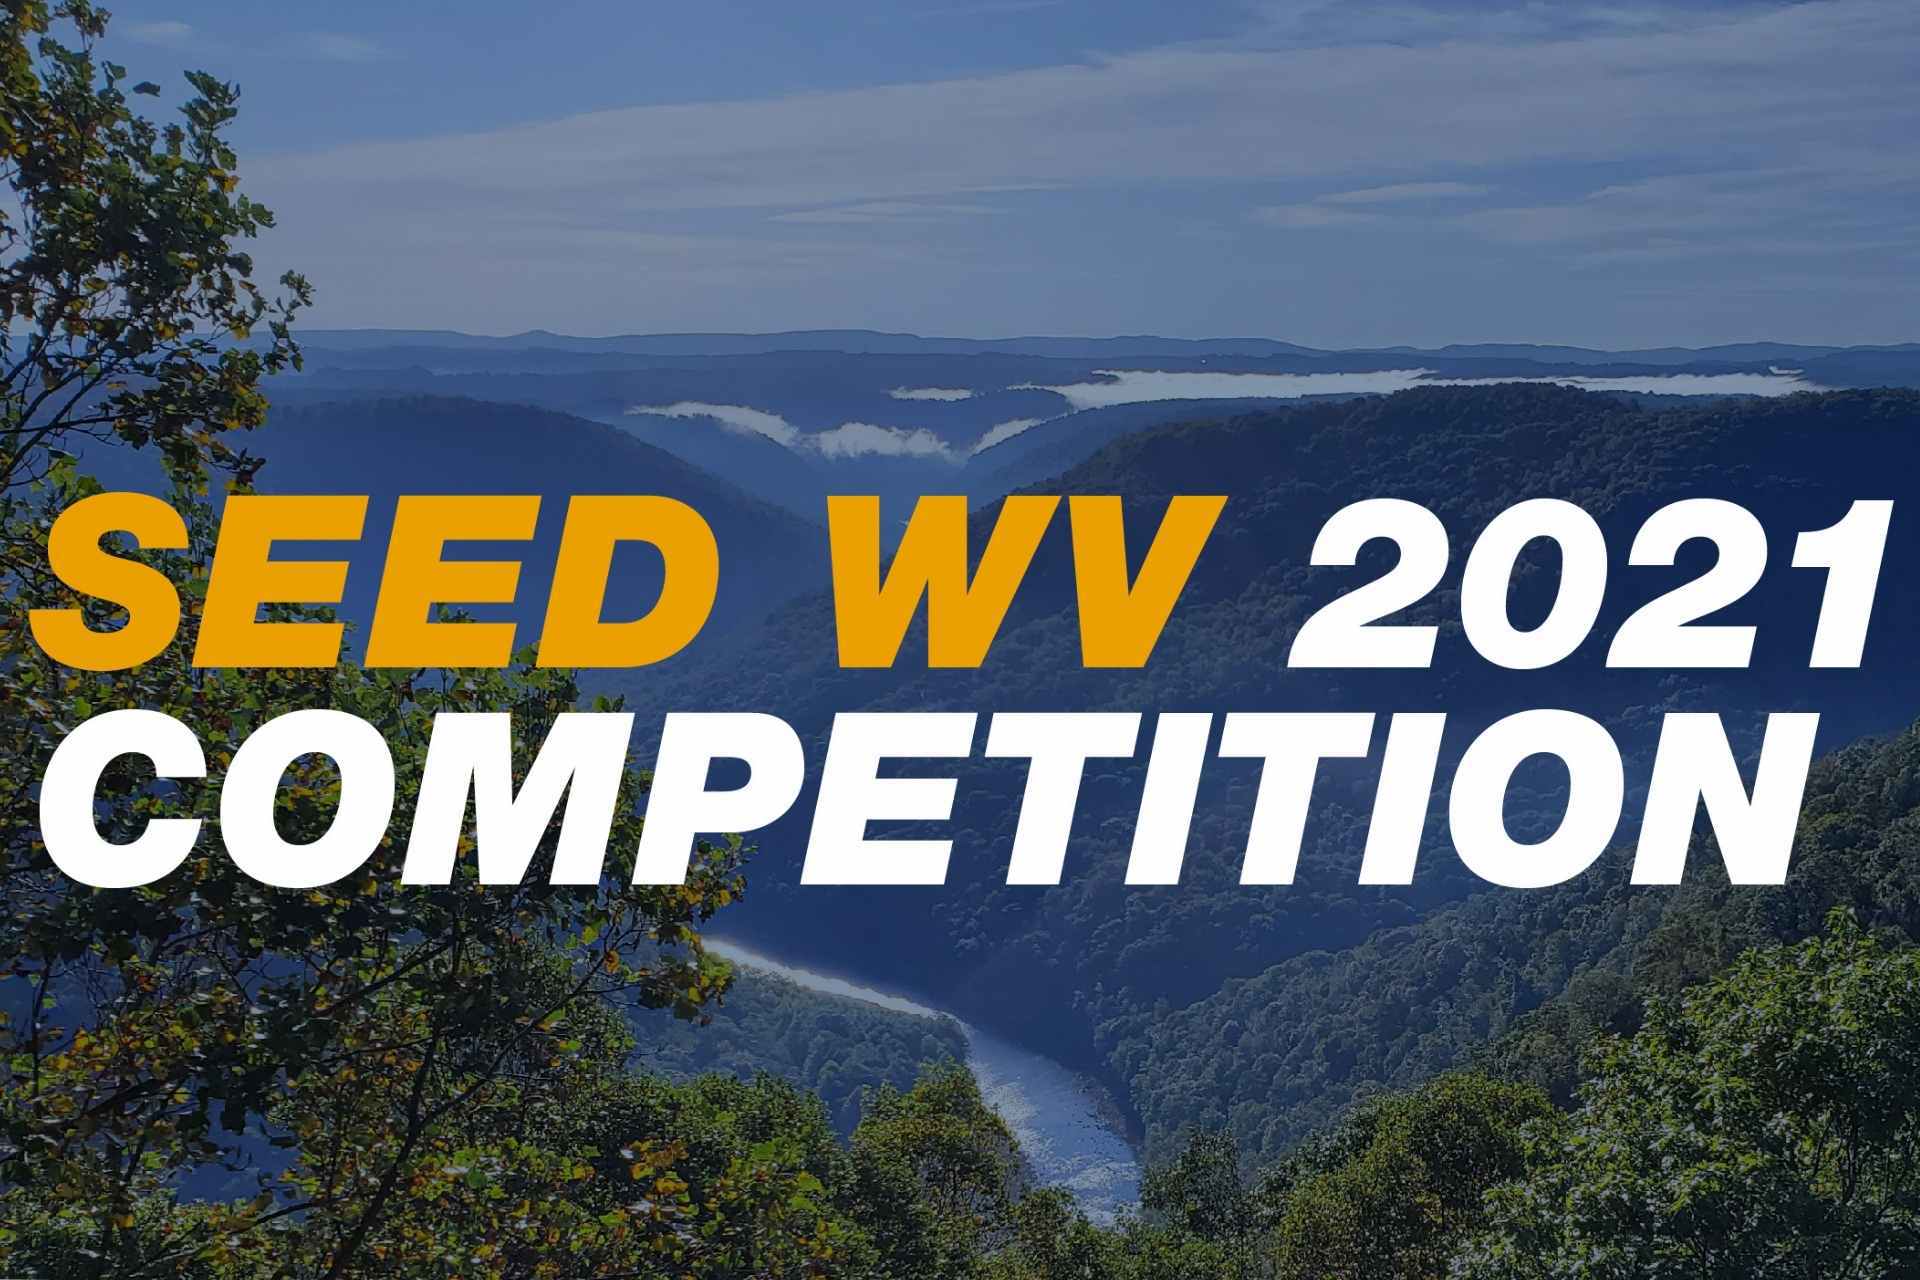 Small business owners find big opportunity in first annual Seed WV competition